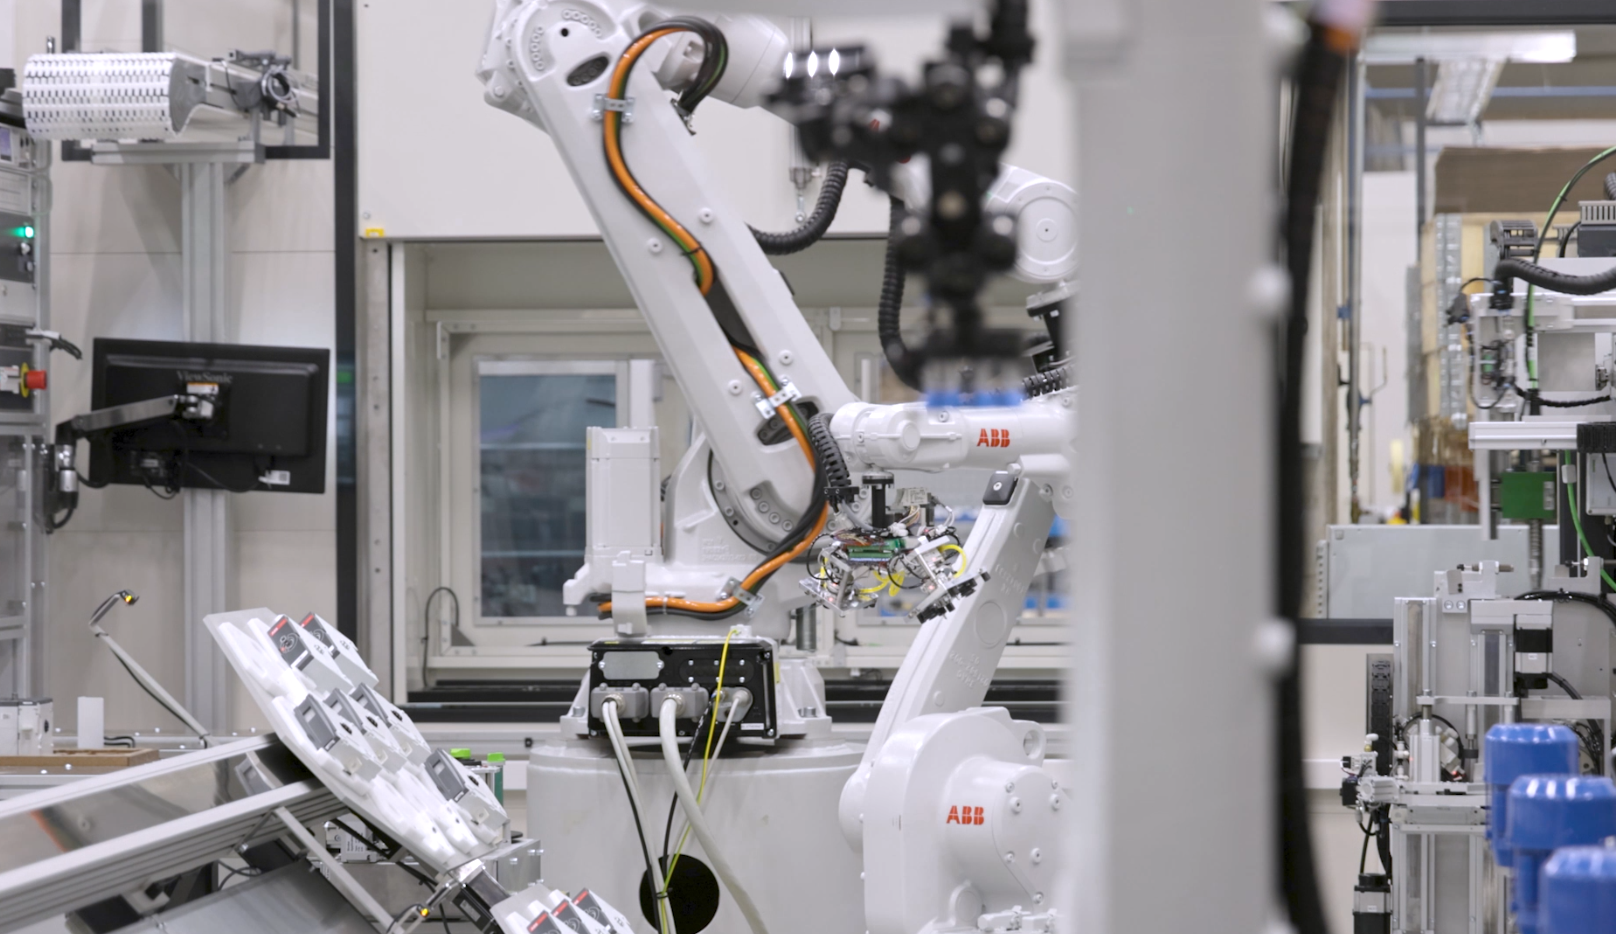 5x production boost for ABB with custom automation solution